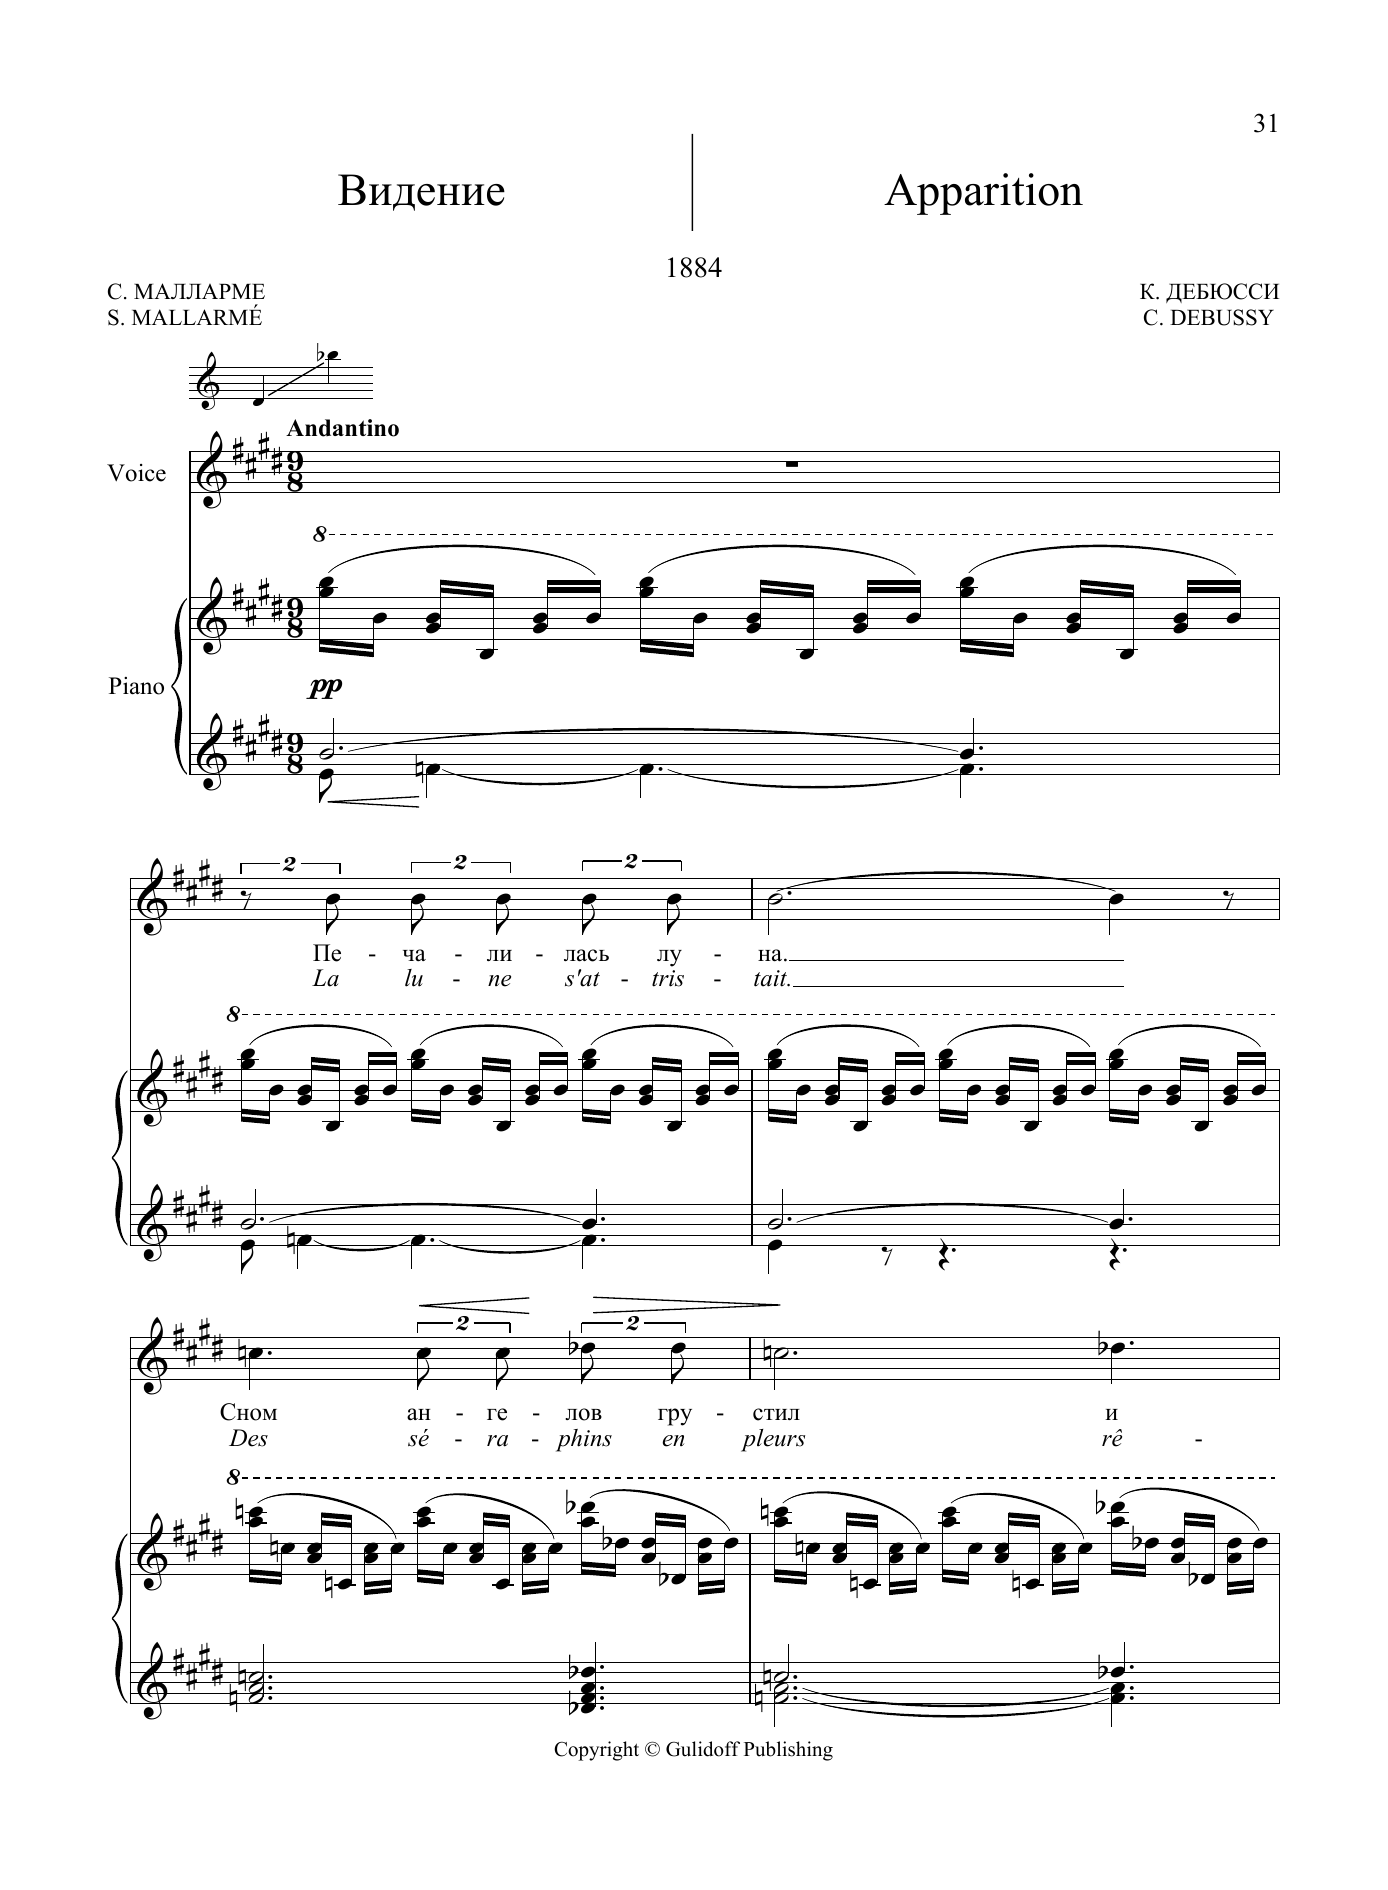 Download Claude Debussy 20 Songs Vol. 1: Apparition Sheet Music